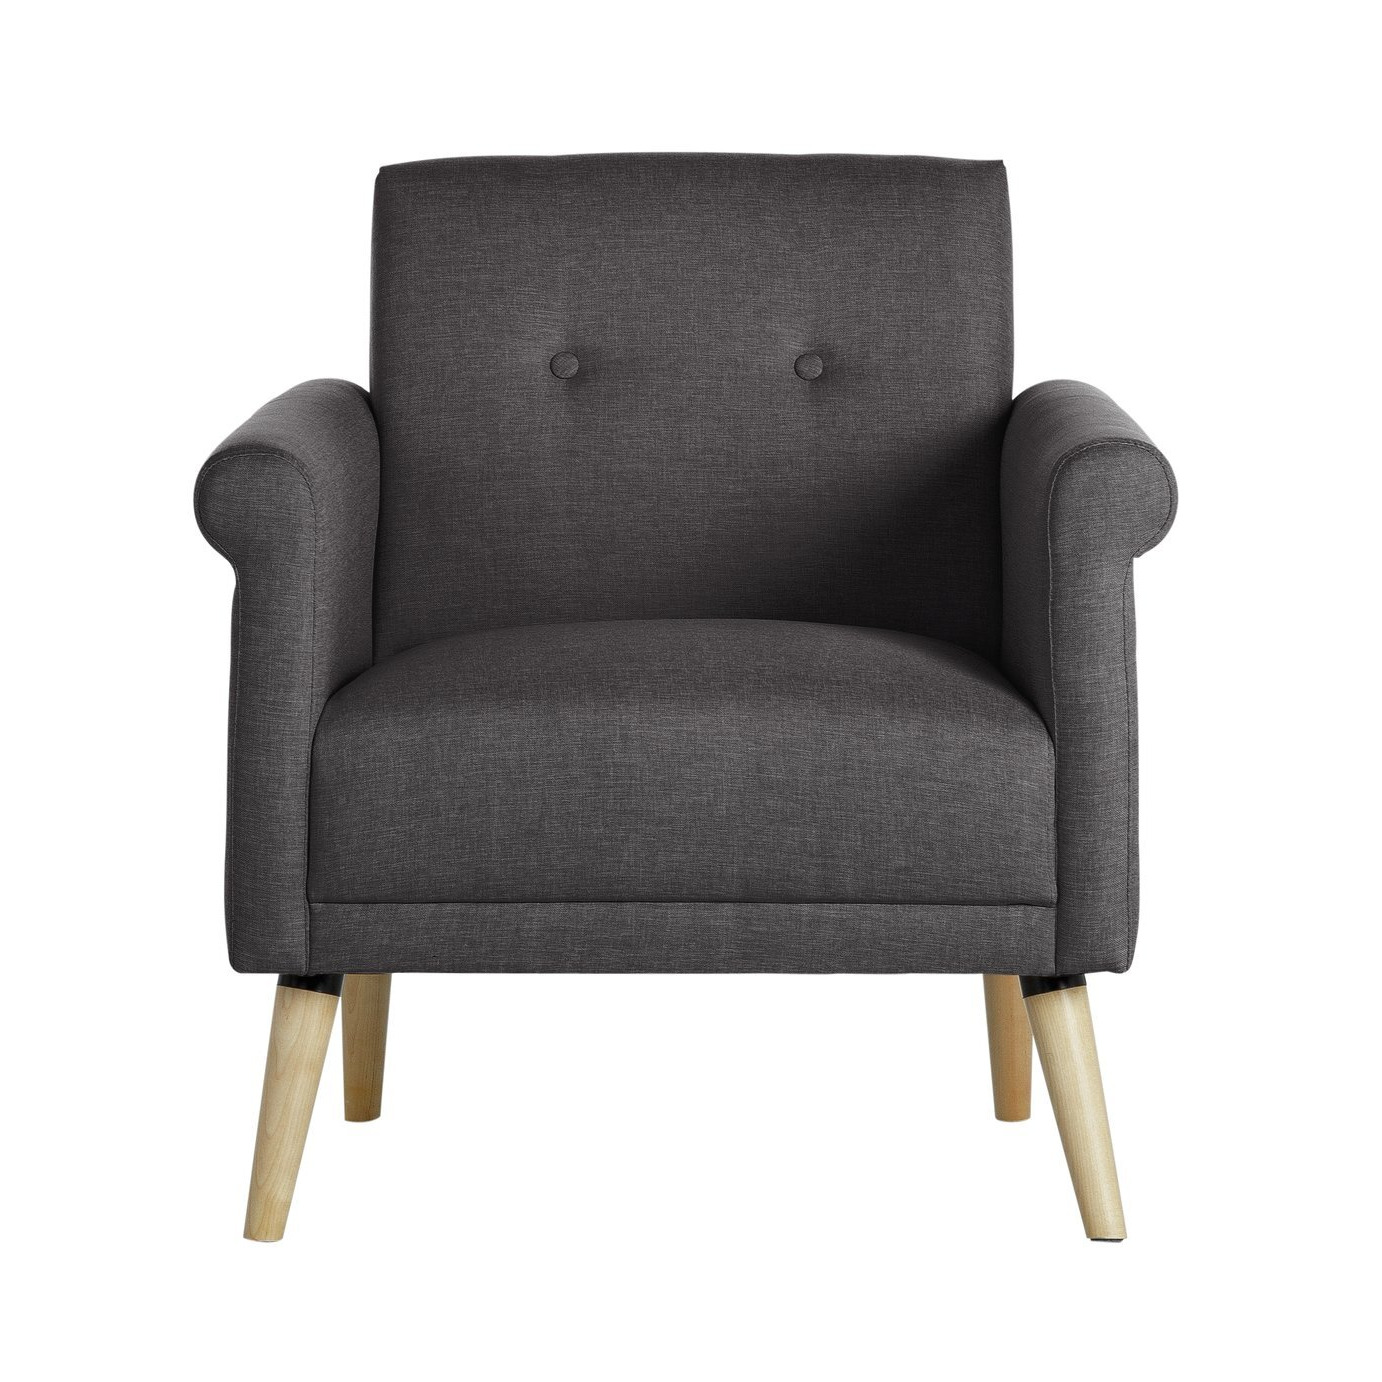 Habitat Evie Armchair in a Box - Charcoal - image 1